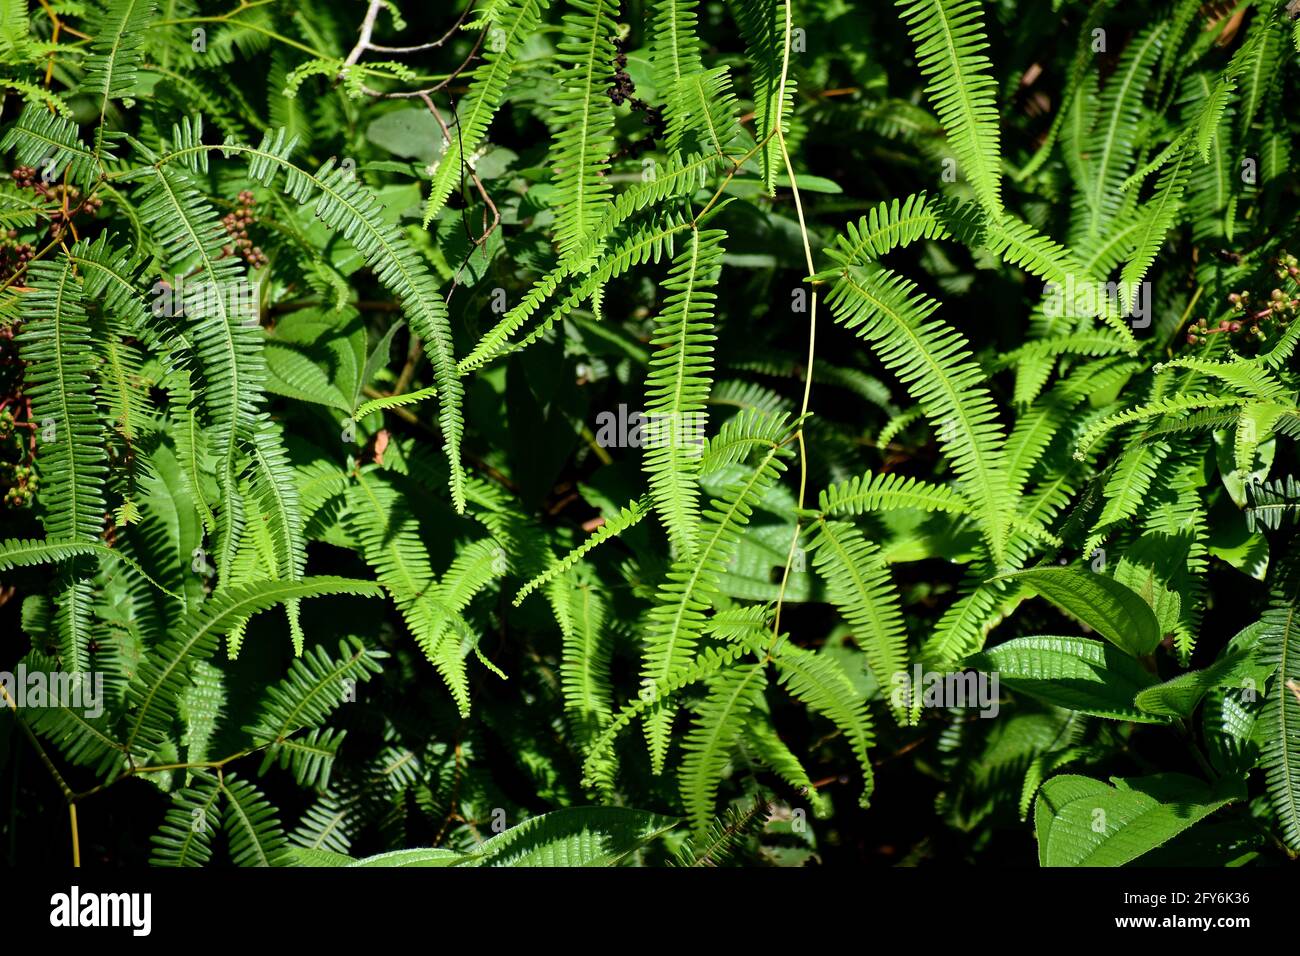 Ferns photographed during a road trip through the Trinidad North Coast. Stock Photo